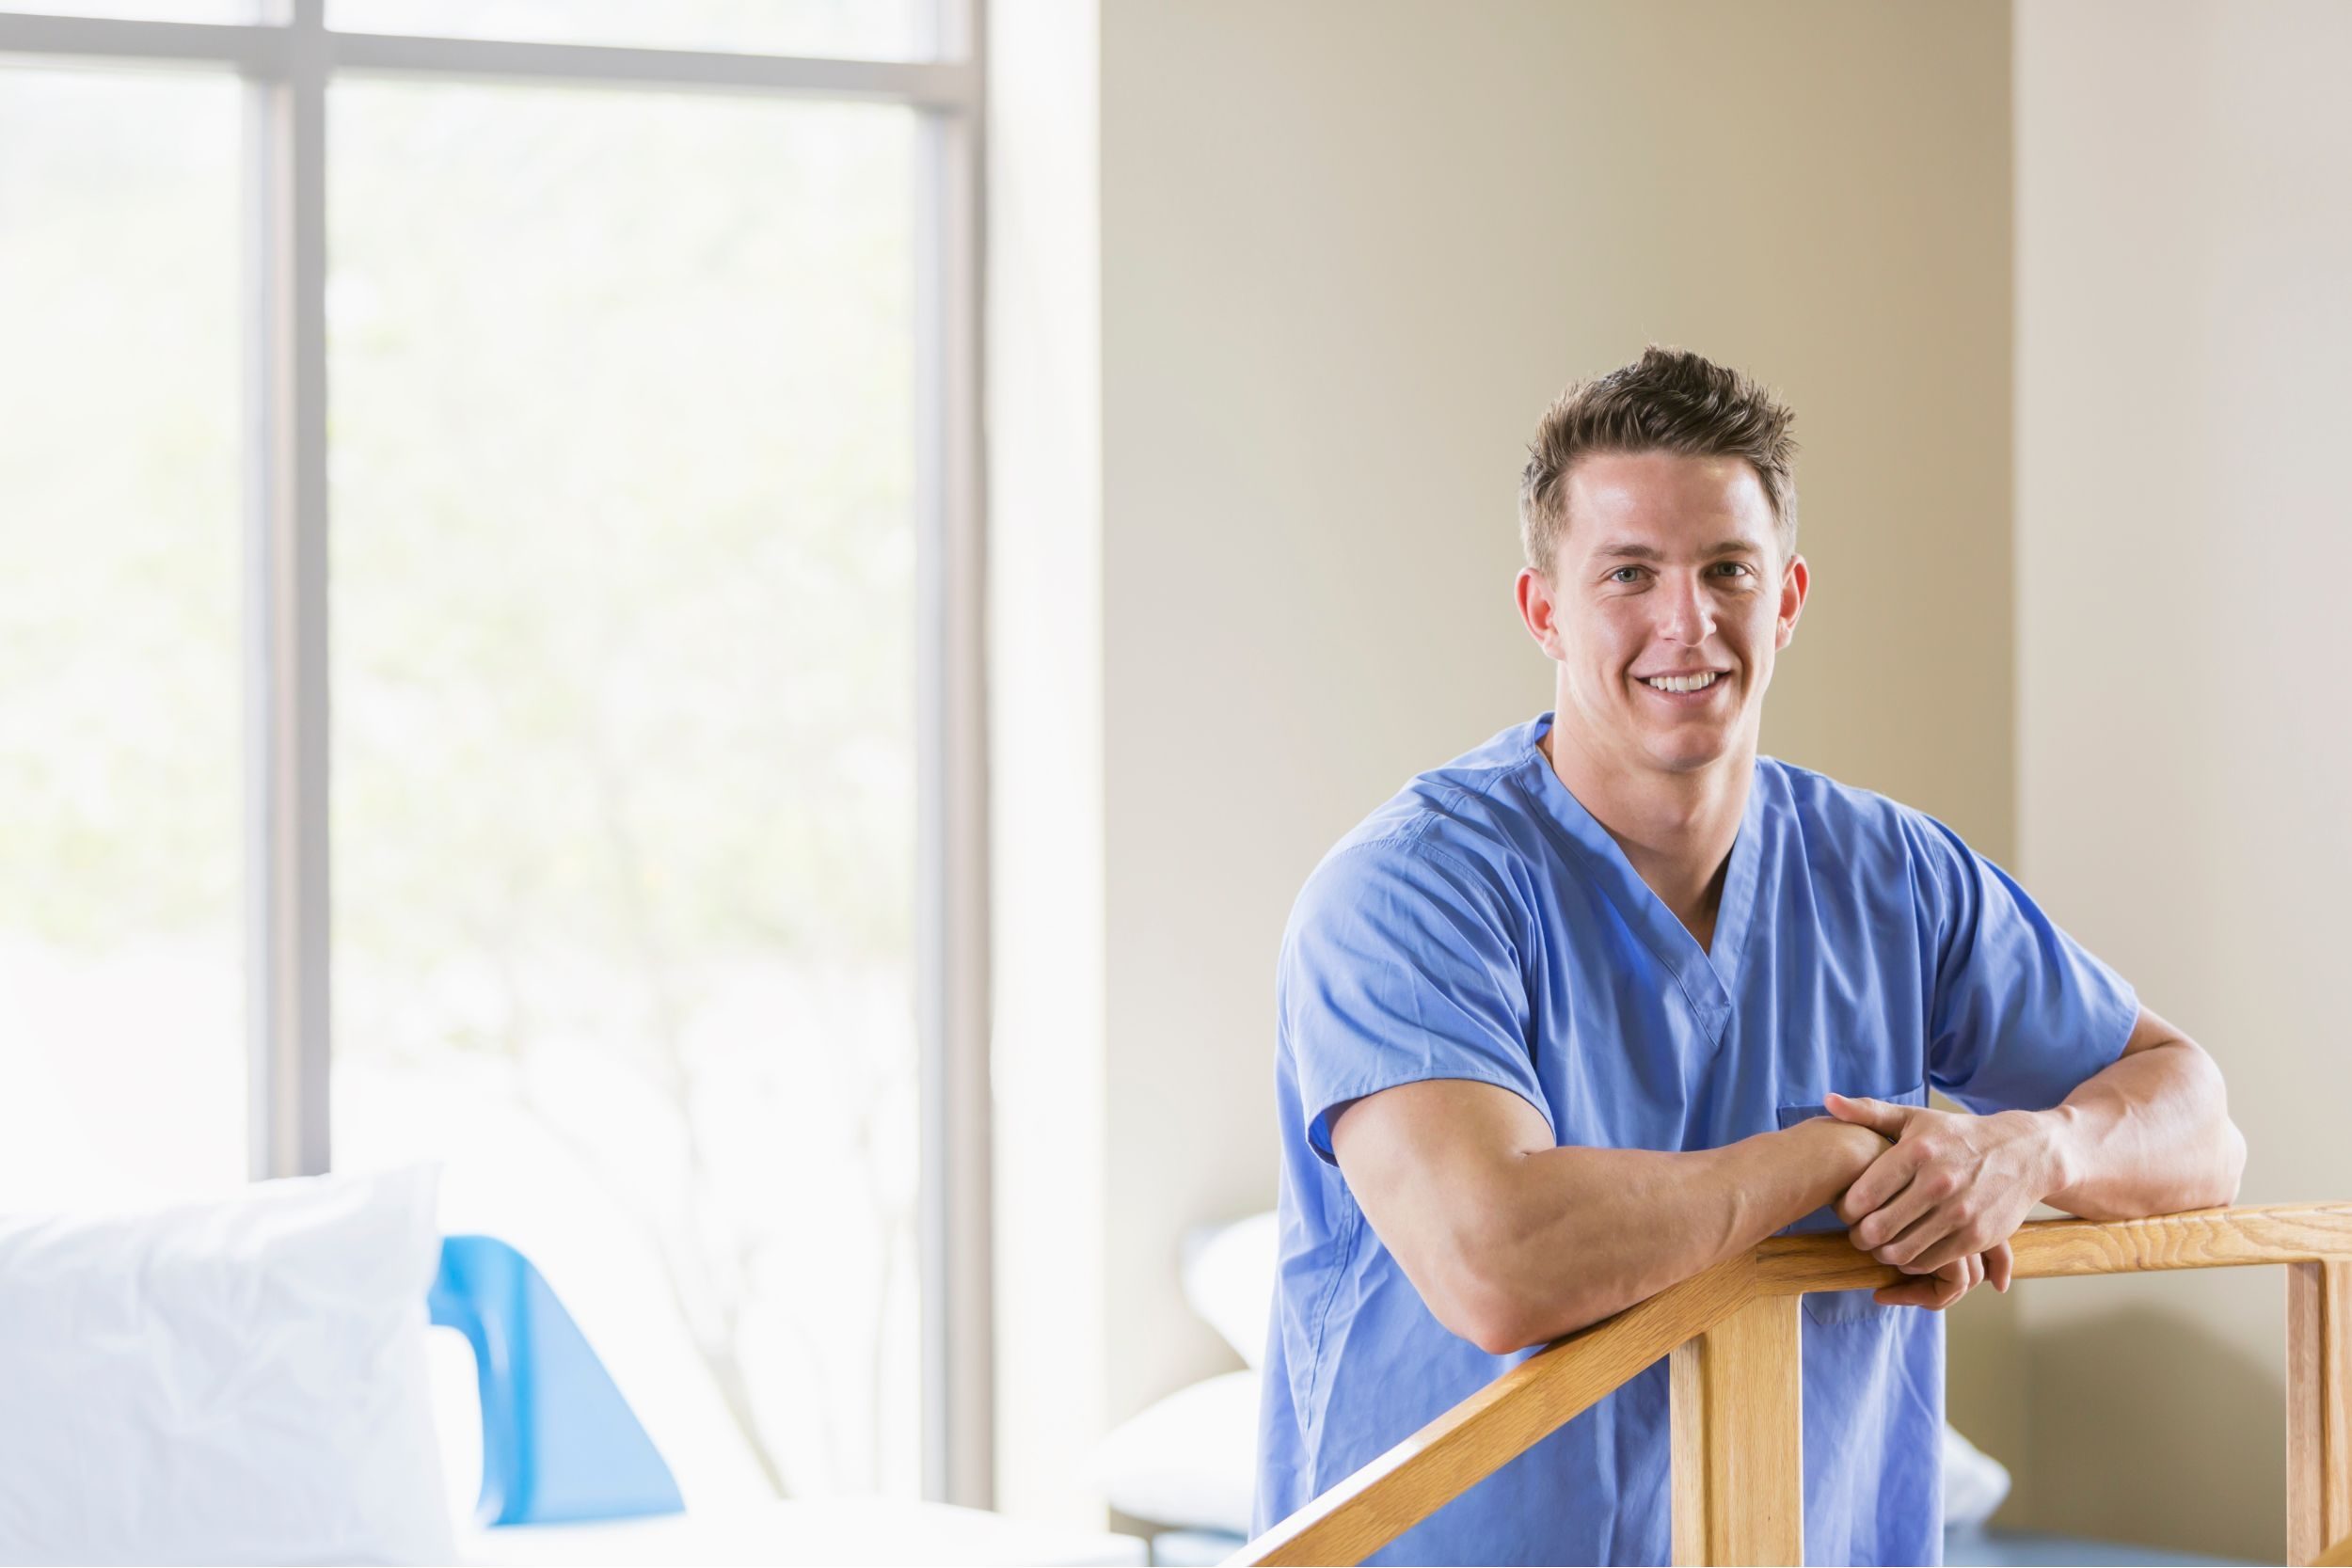 A male young healthcare worker in scrubs smiling at the camera